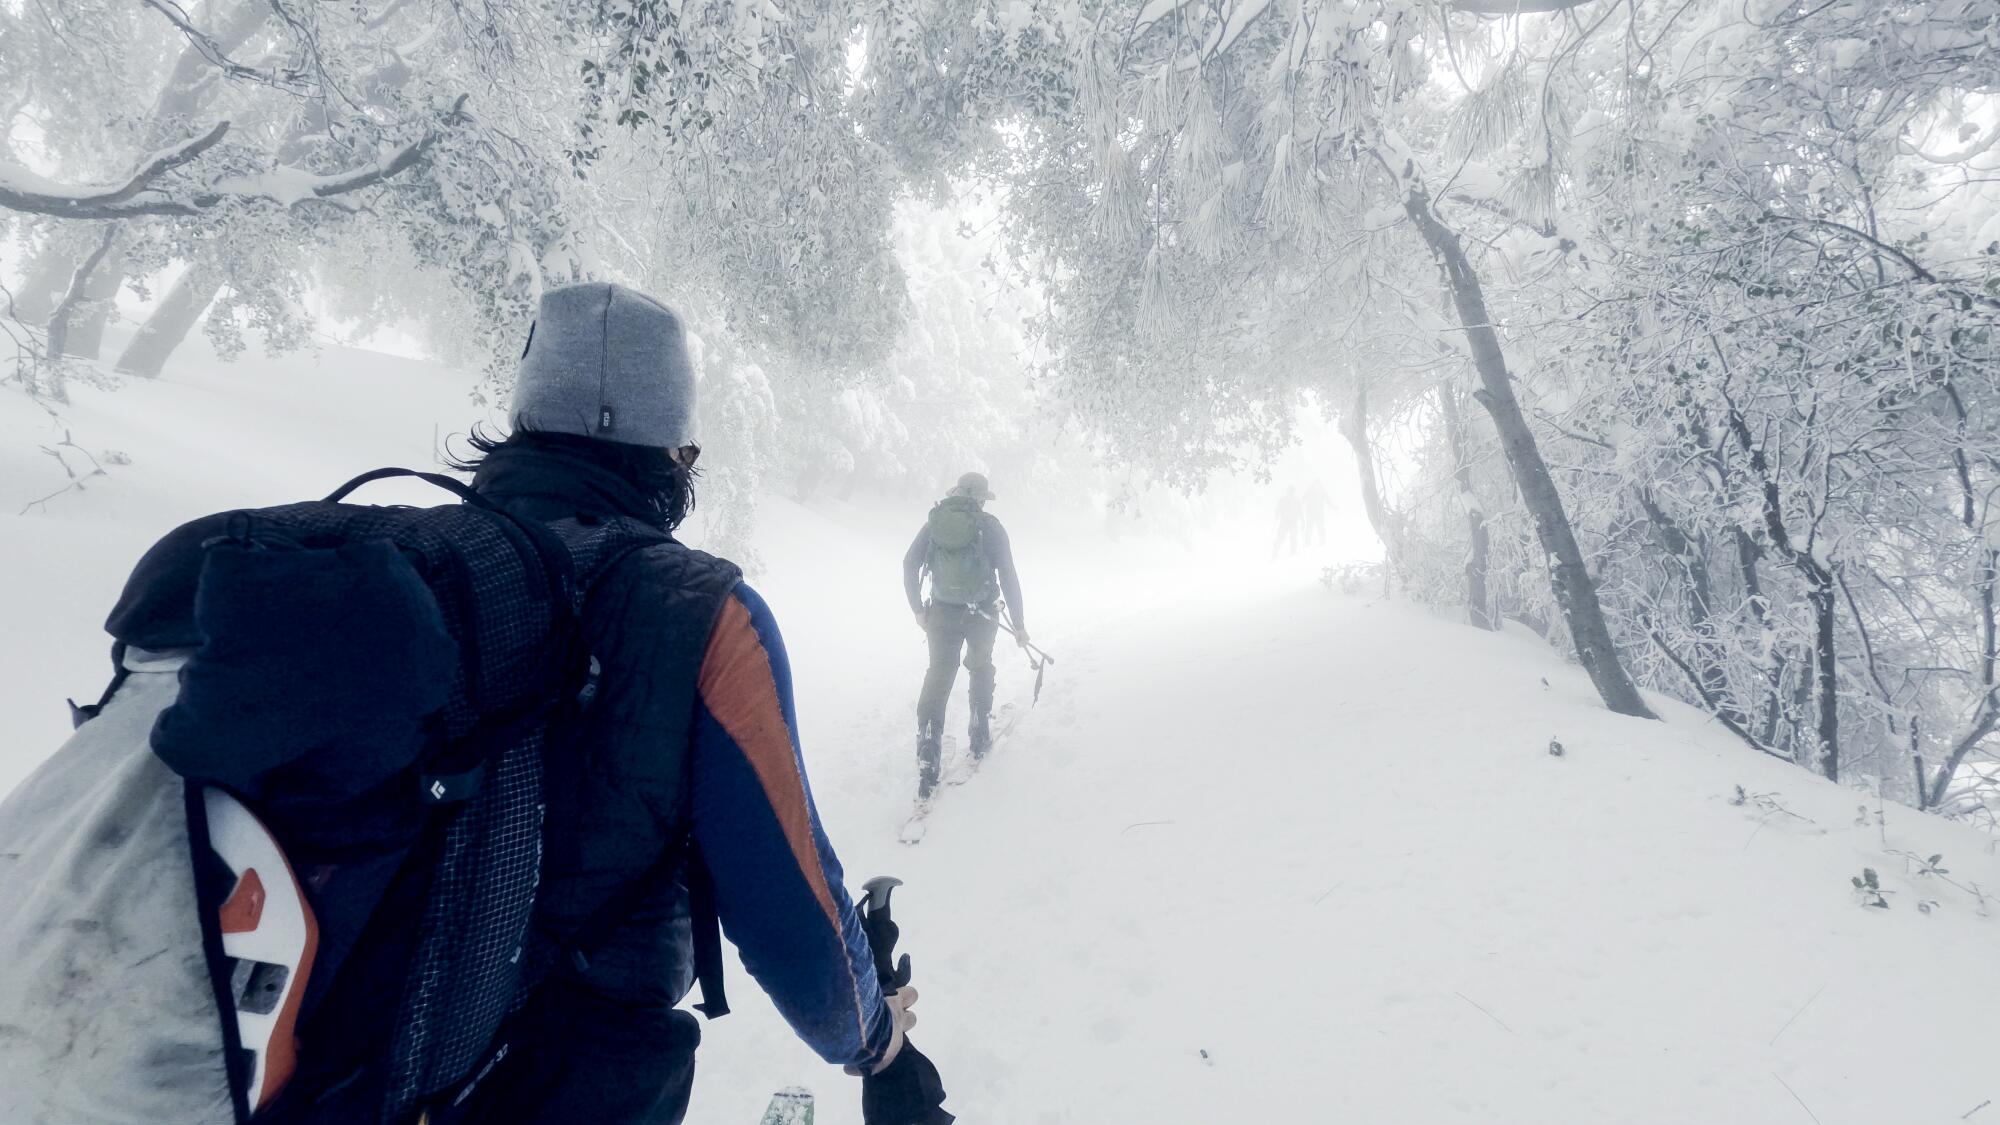 A group of skiers make their way up Mt. Lukens on the morning of Feb. 26.